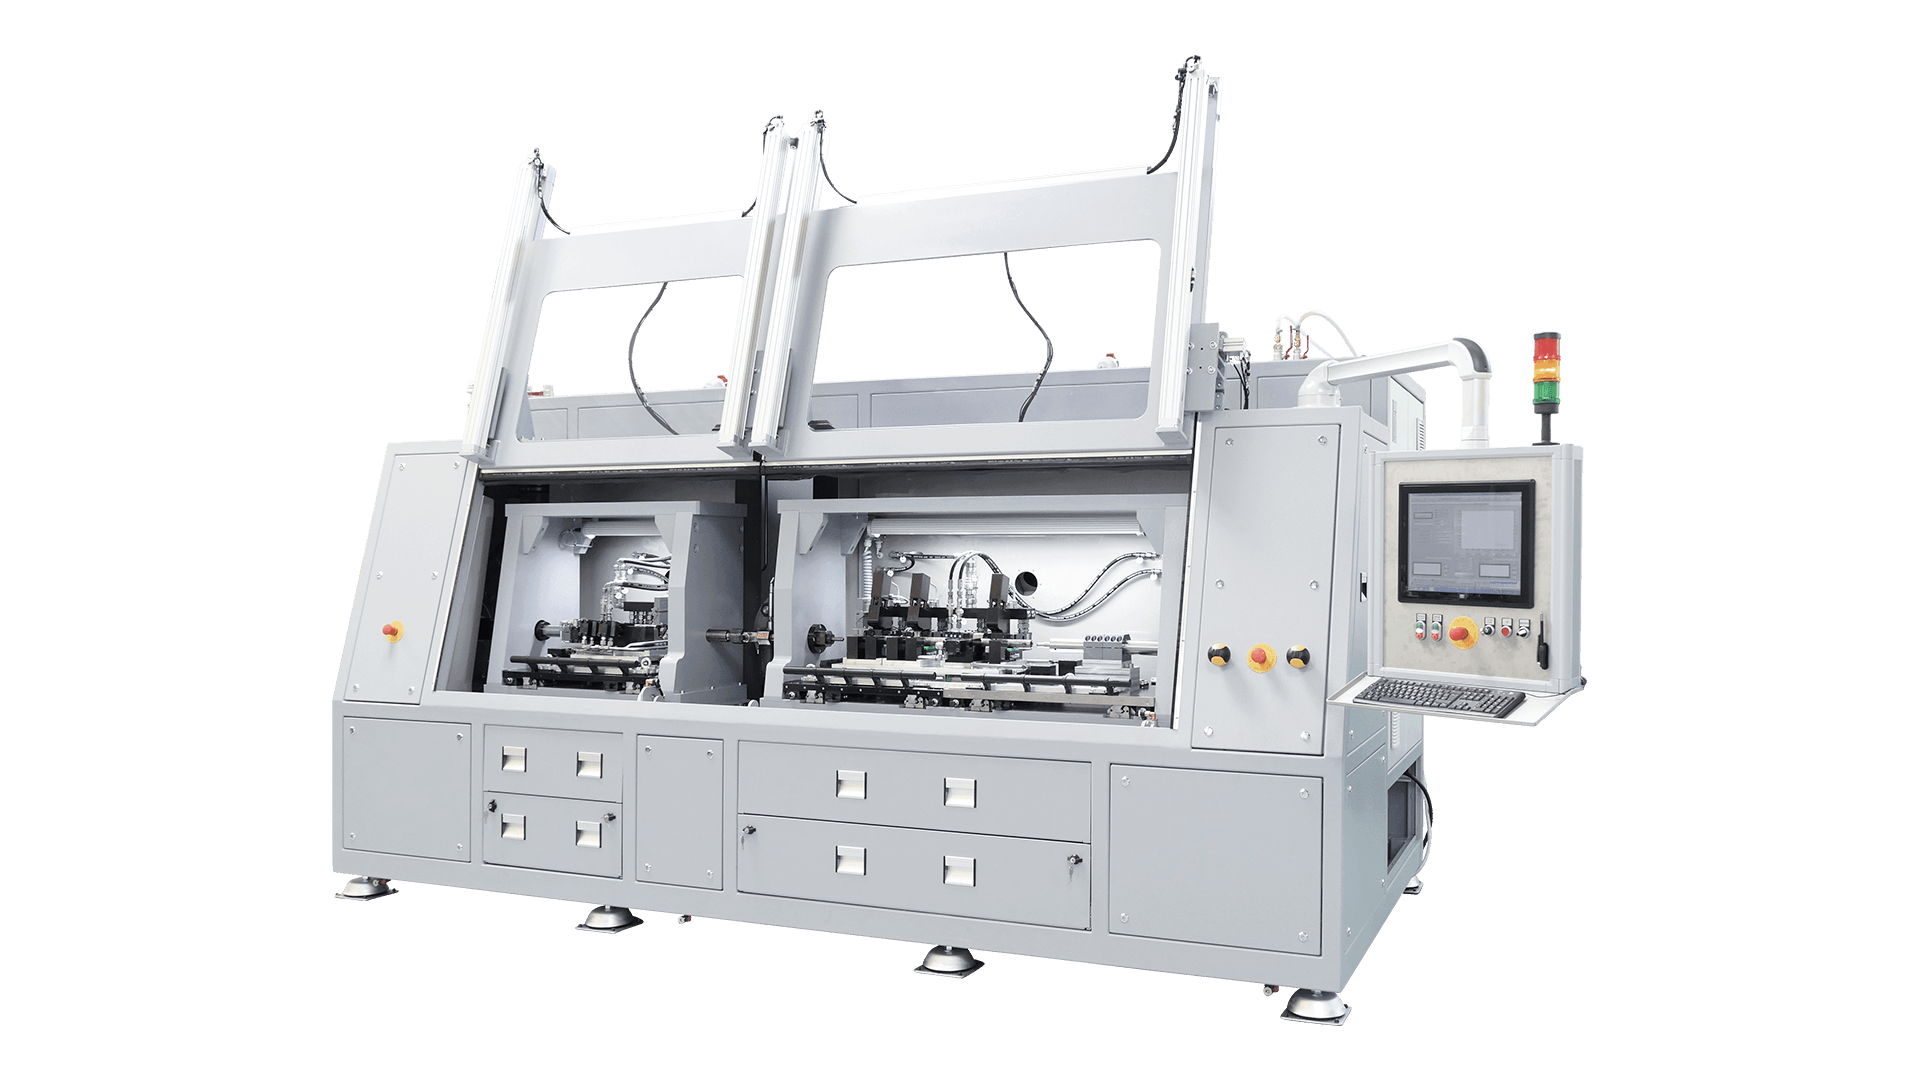 Double chamber autofrettage machine with open test chamber door